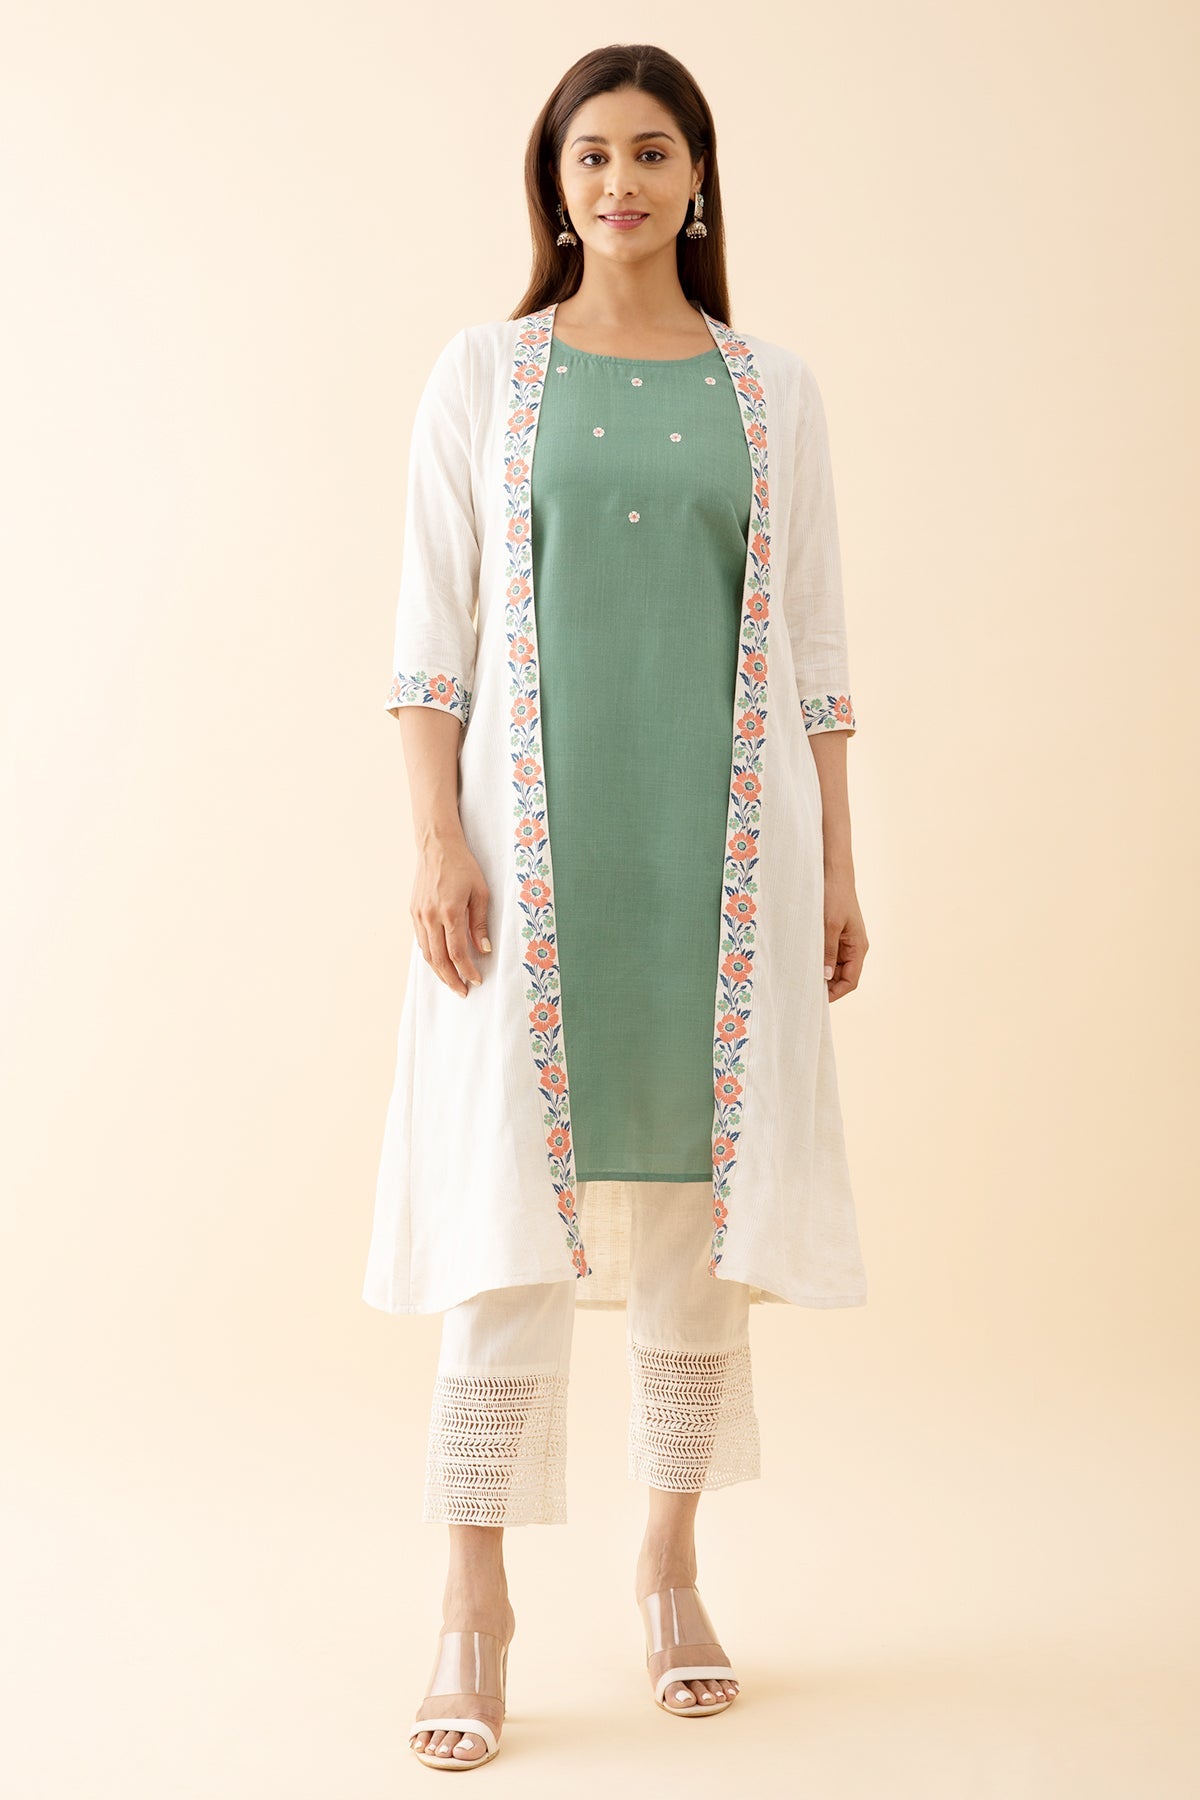 Floral Embroidered Kurta with Printed Jackets - Green